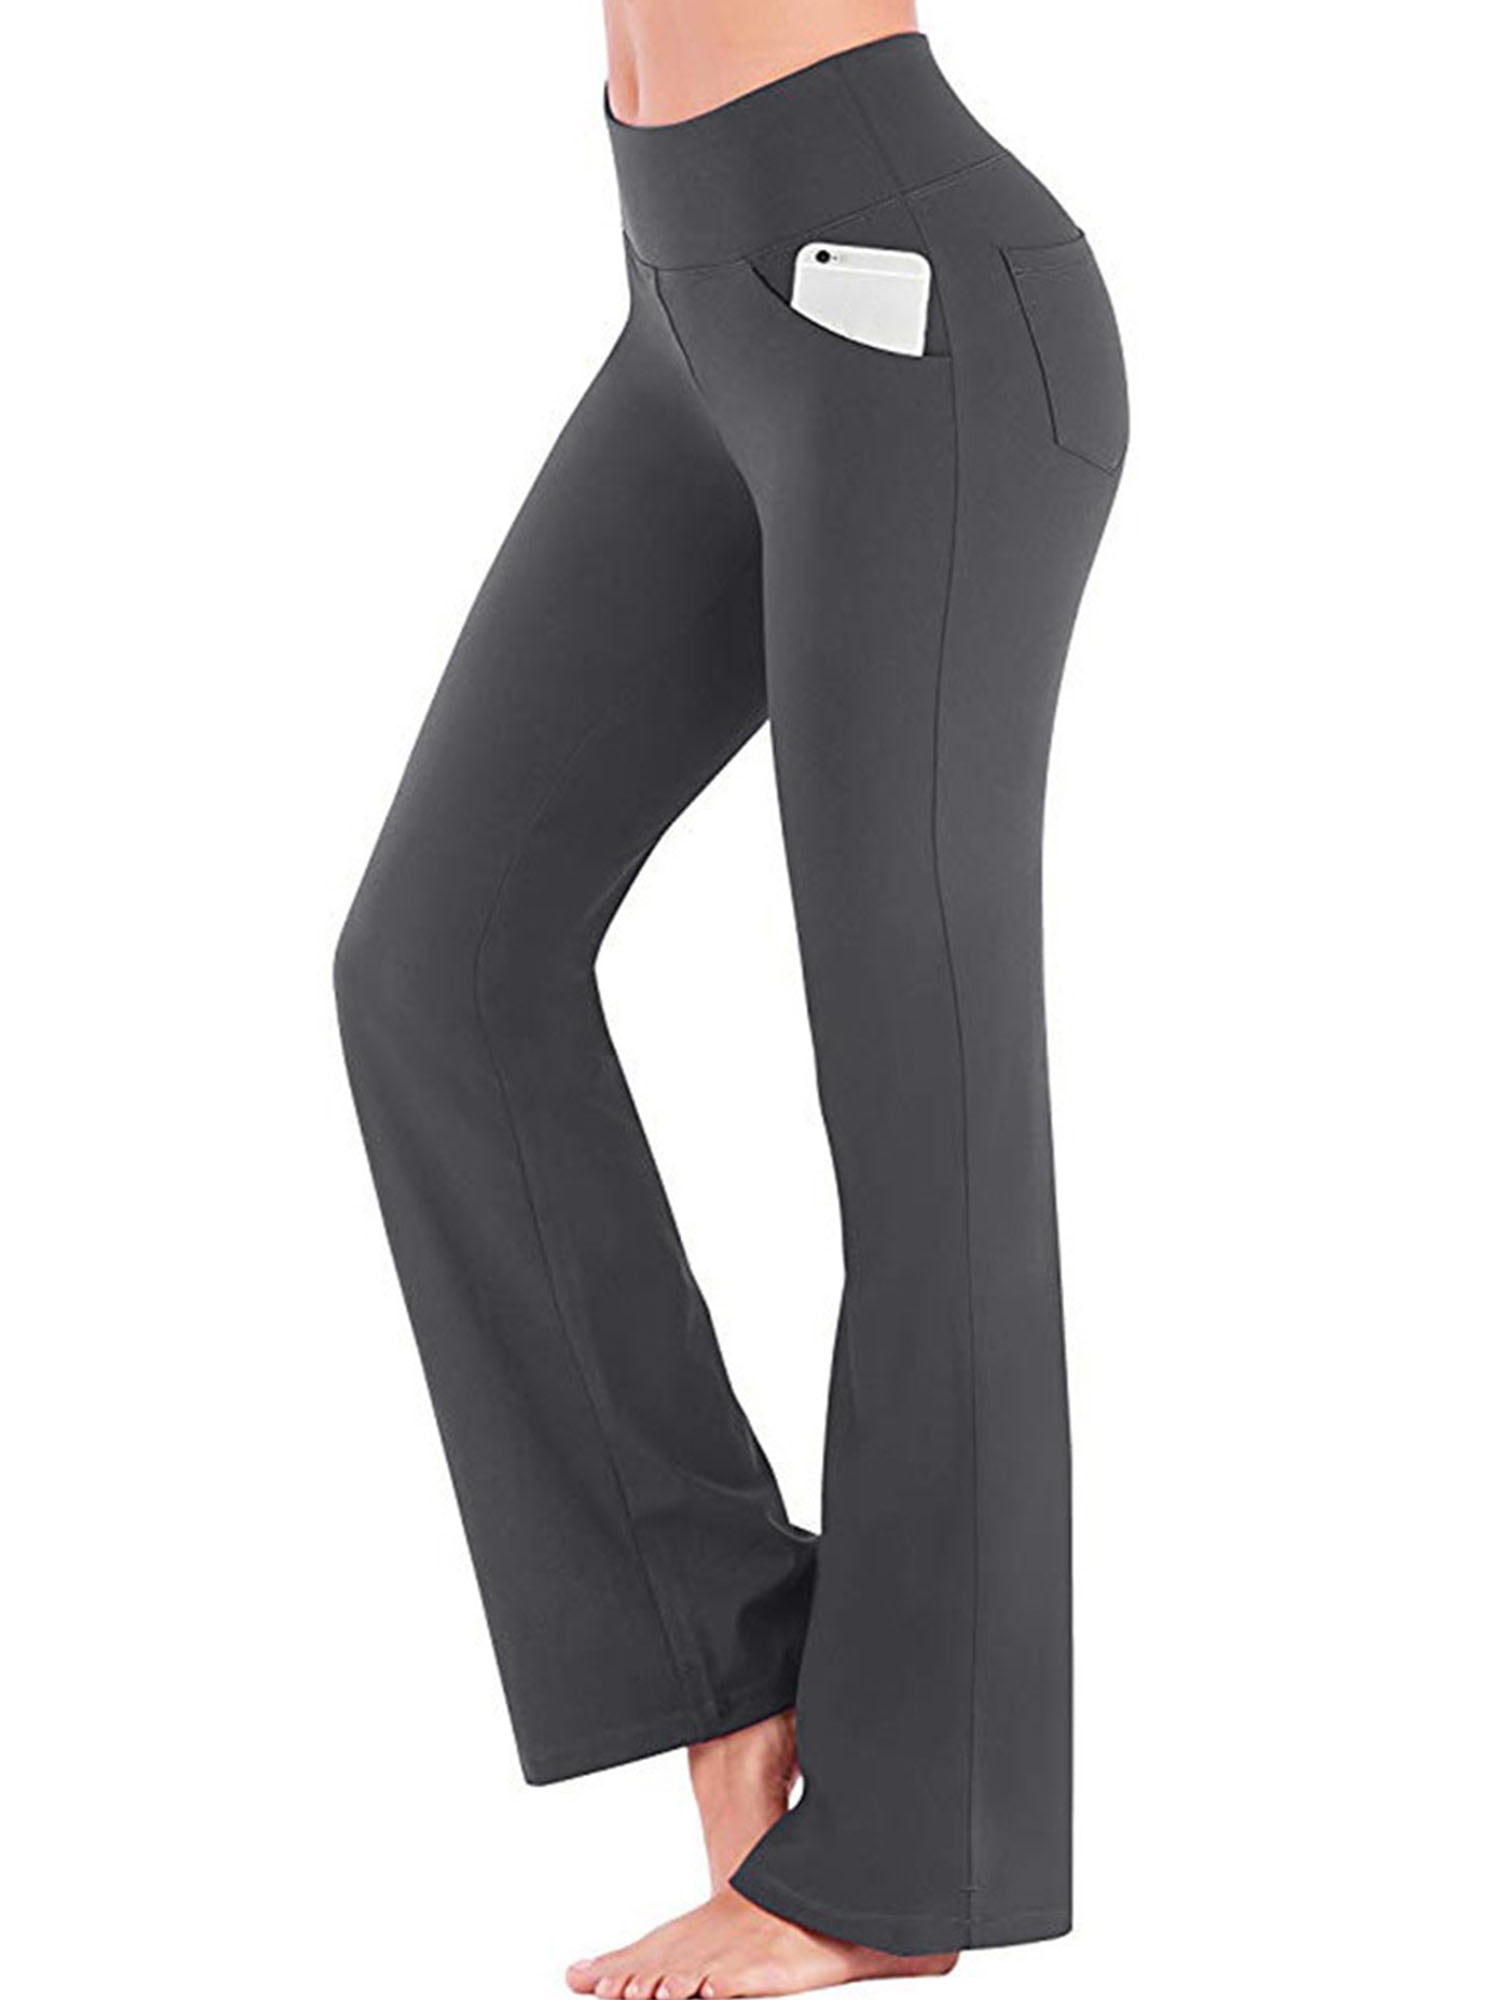 Sexy Dance Women Bootcut Yoga Pants with Pockets High Waist Boot Cut Gym  Fitness Trousers Plus Size Pant Stretch Yoga Workout Pants